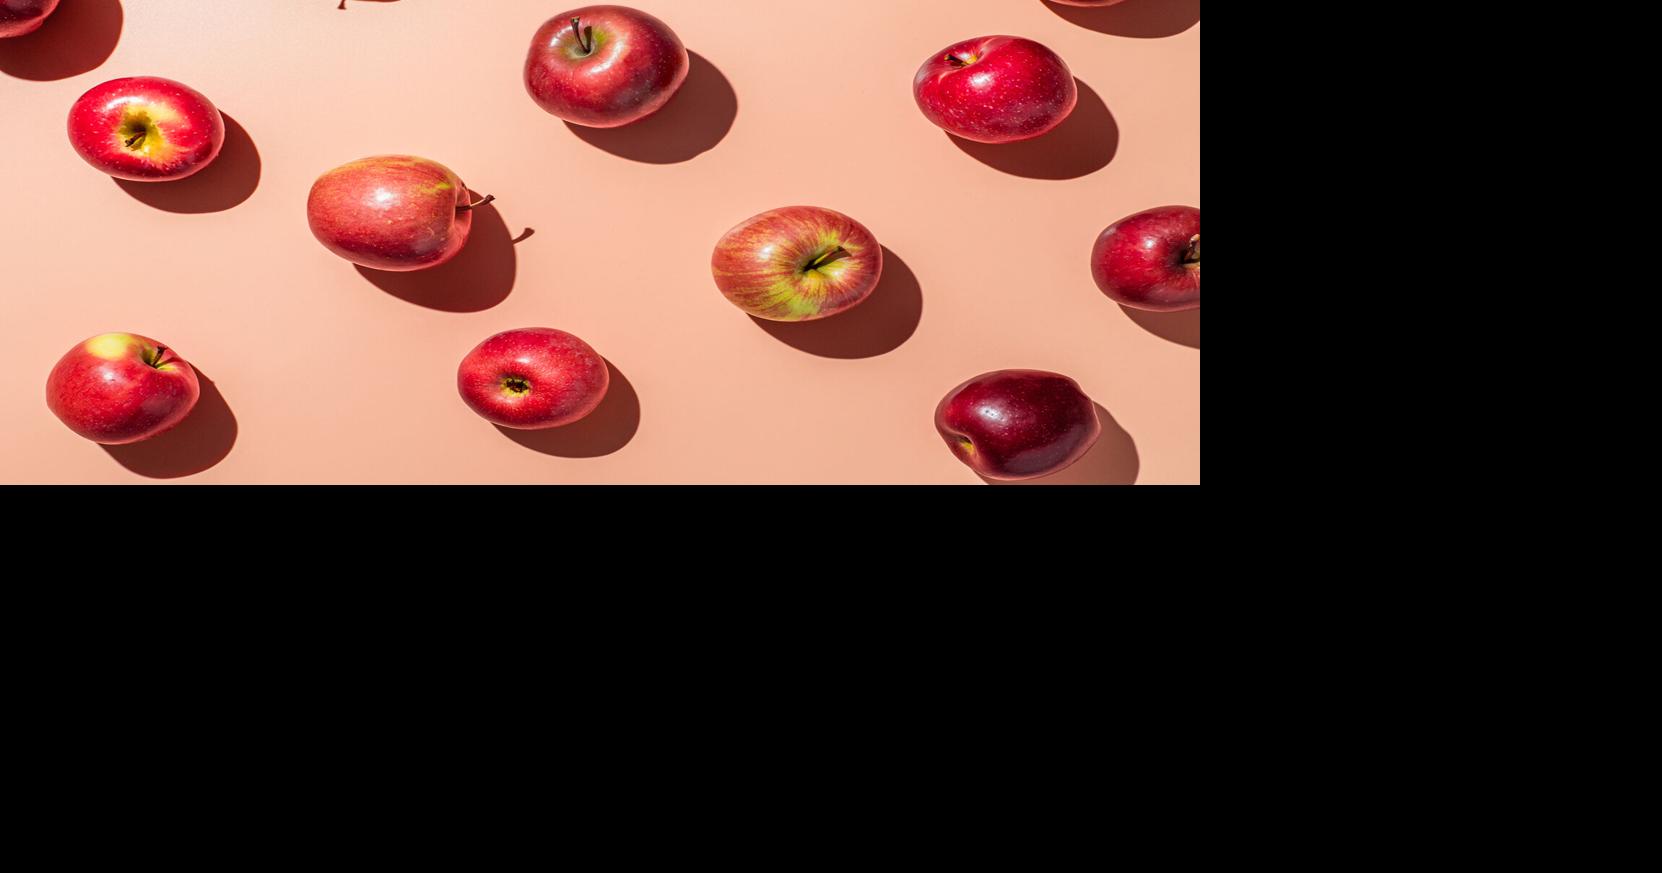 Red Delicious Apples Have Finally Been Dethroned